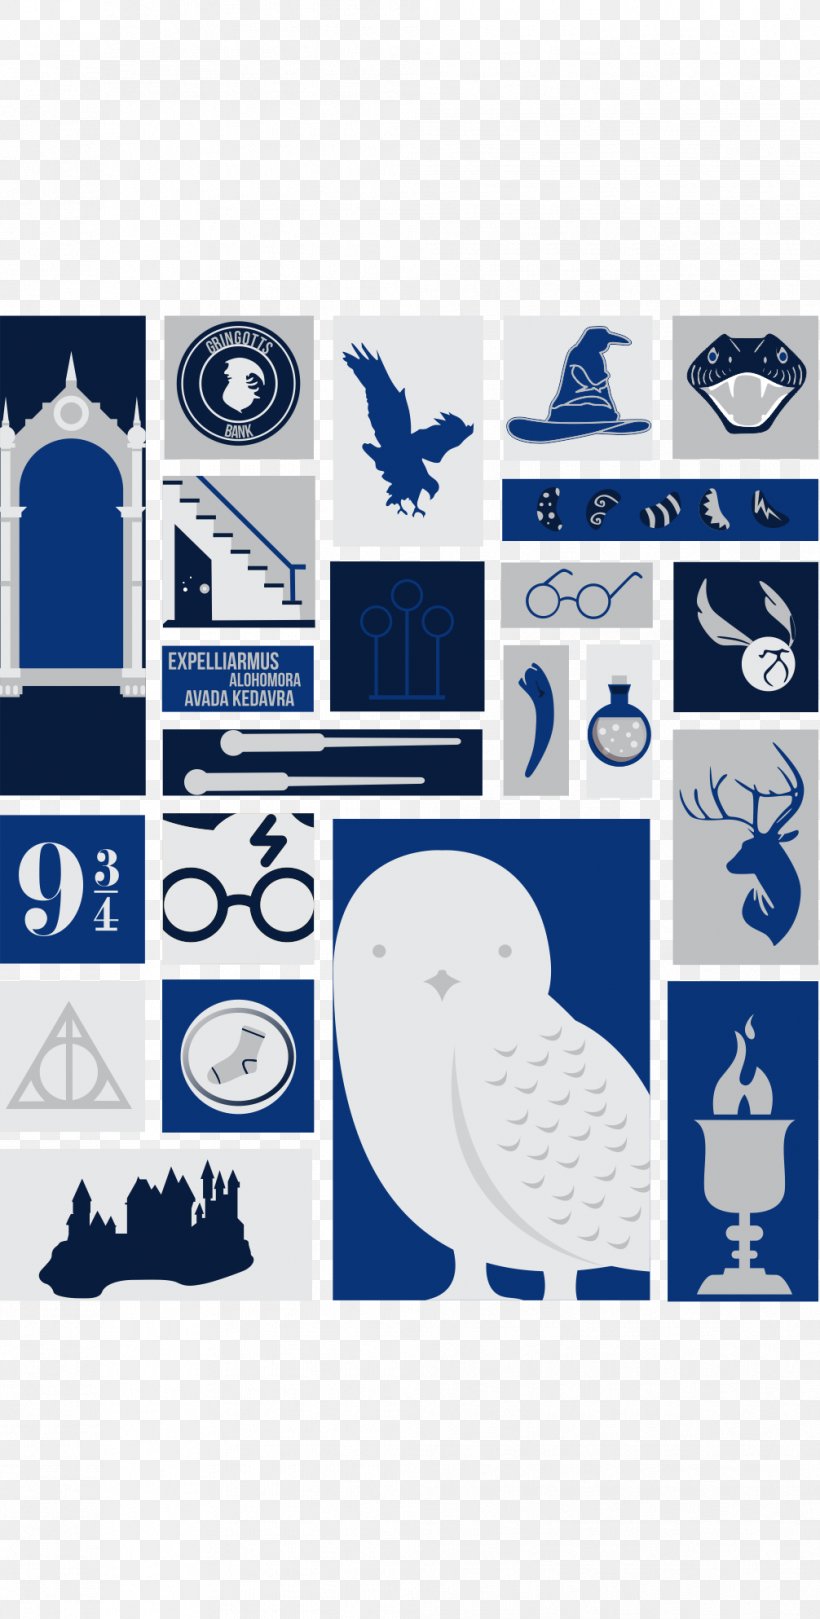 Harry Potter (Literary Series) Harry Potter And The Deathly Hallows Price Slytherin House Ravenclaw House, PNG, 1006x1987px, Harry Potter Literary Series, Brand, Harry Potter Hogwarts, Iphone, Logo Download Free